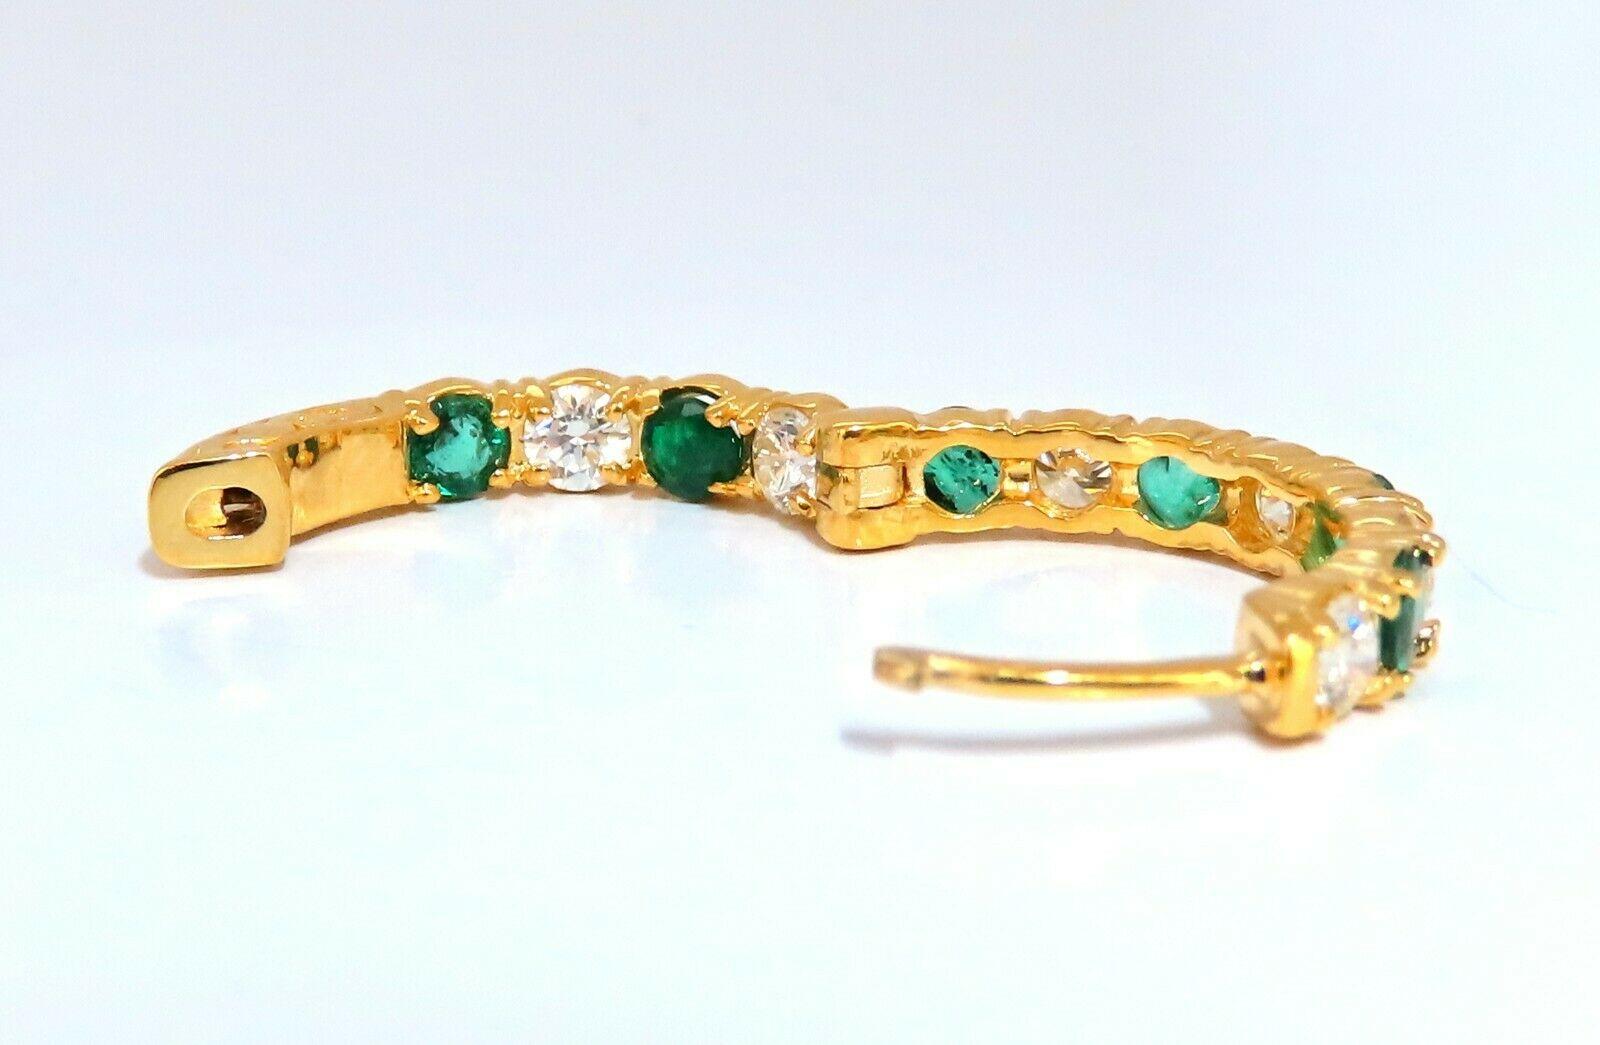 Round Cut 3.34ct Natural Emerald Diamonds Hoop Earrings 14kt Yellow Gold Inside Out